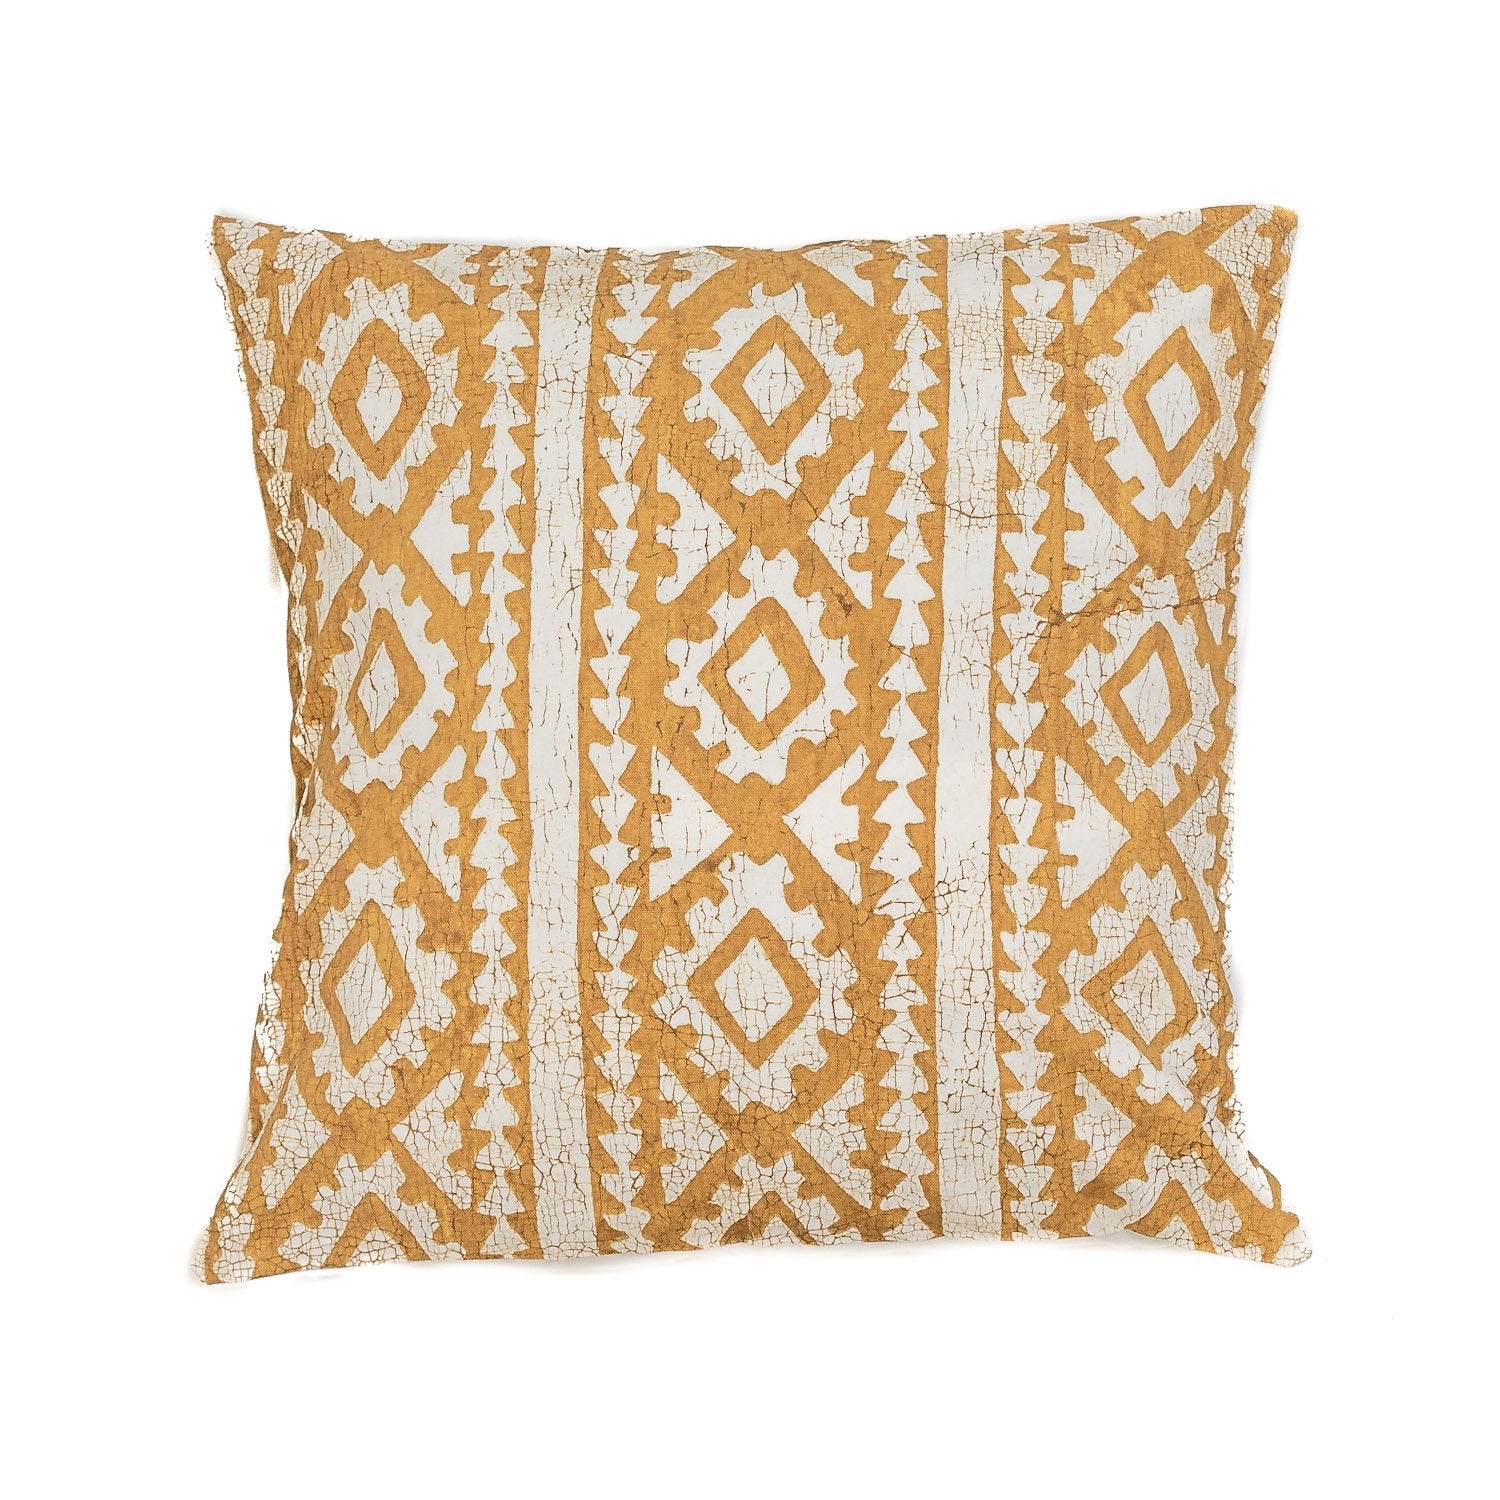 Moroccan Crackles Mustard Cushion Cover - Hand Painted by TRIBAL TEXTILES - Handcrafted Home Decor Interiors - African Made